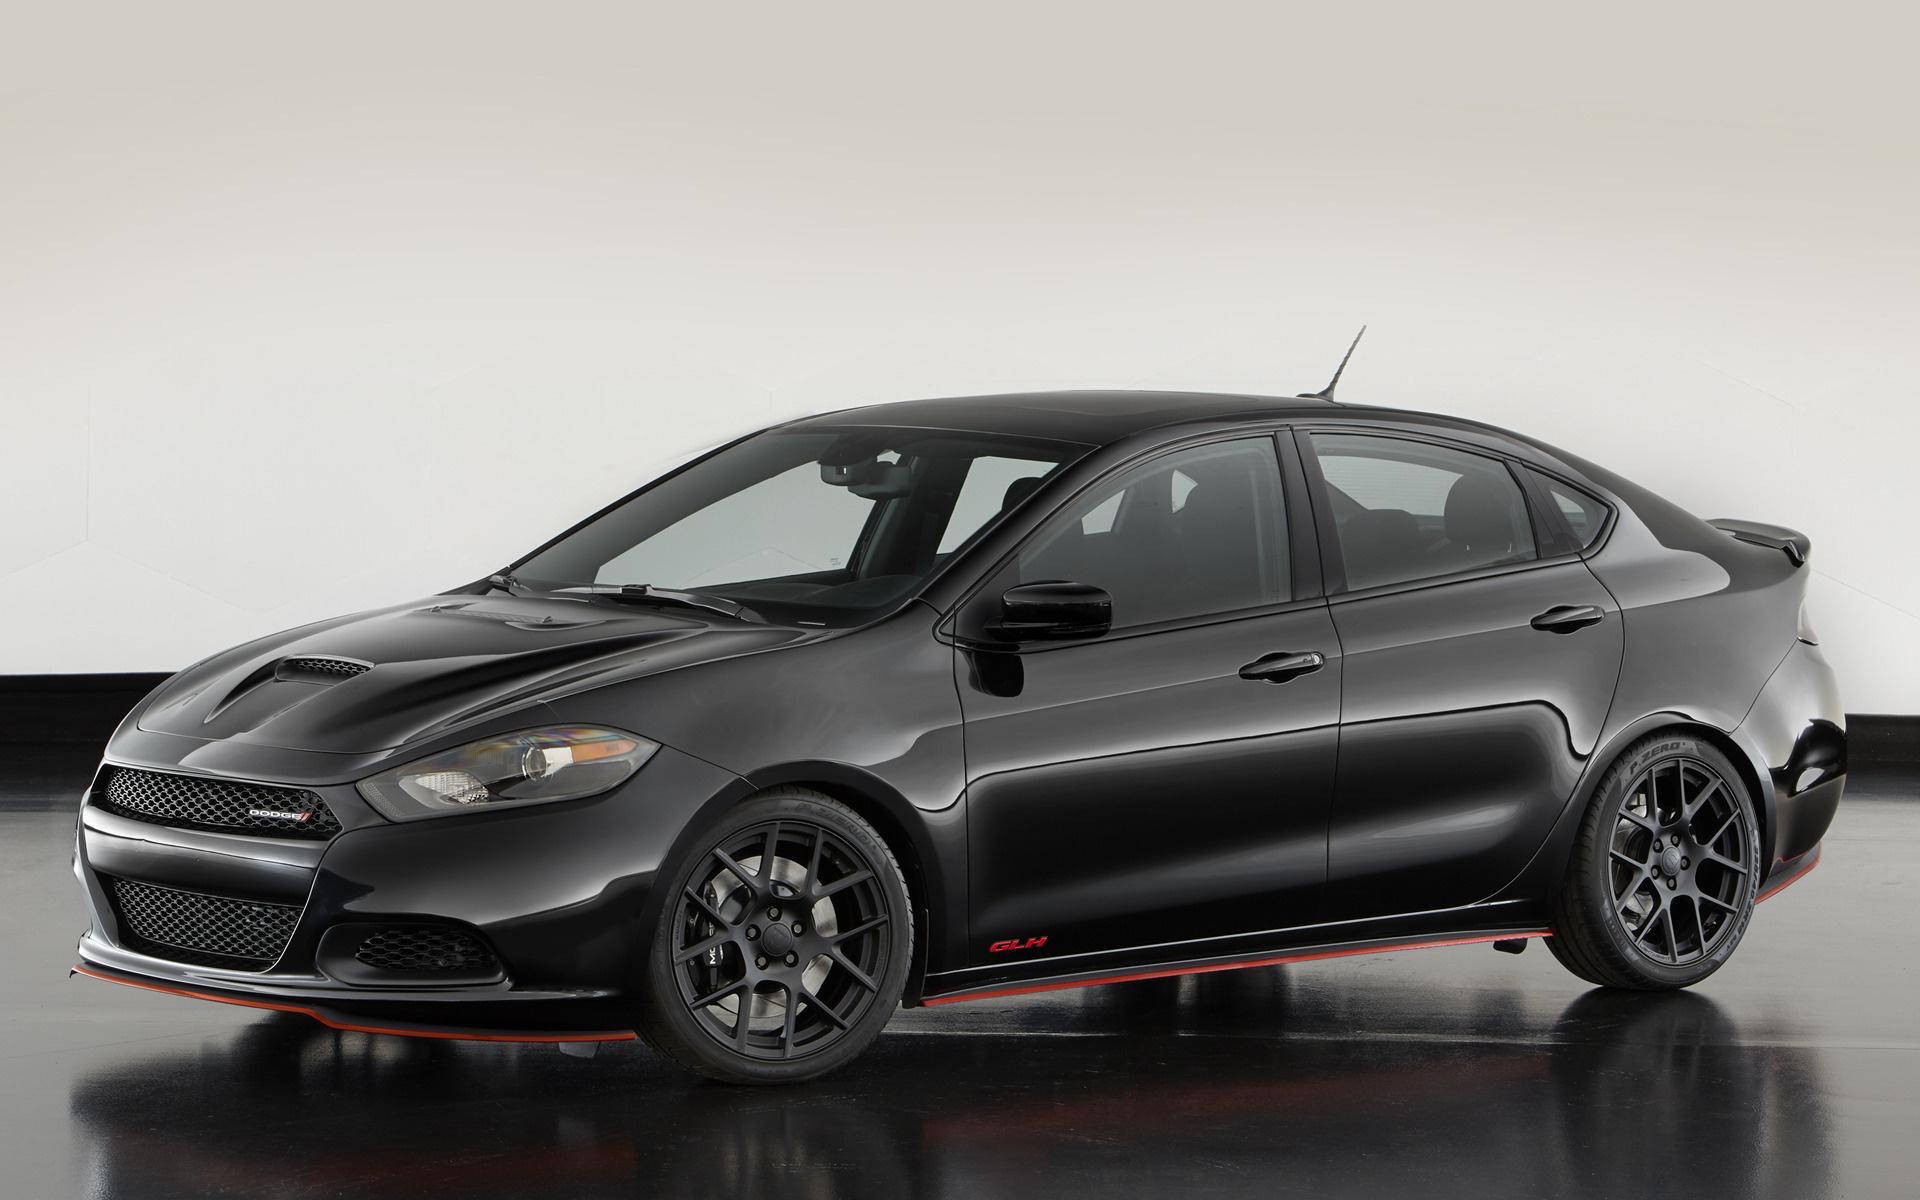 Dodge Dart GLH Concept and HD Image